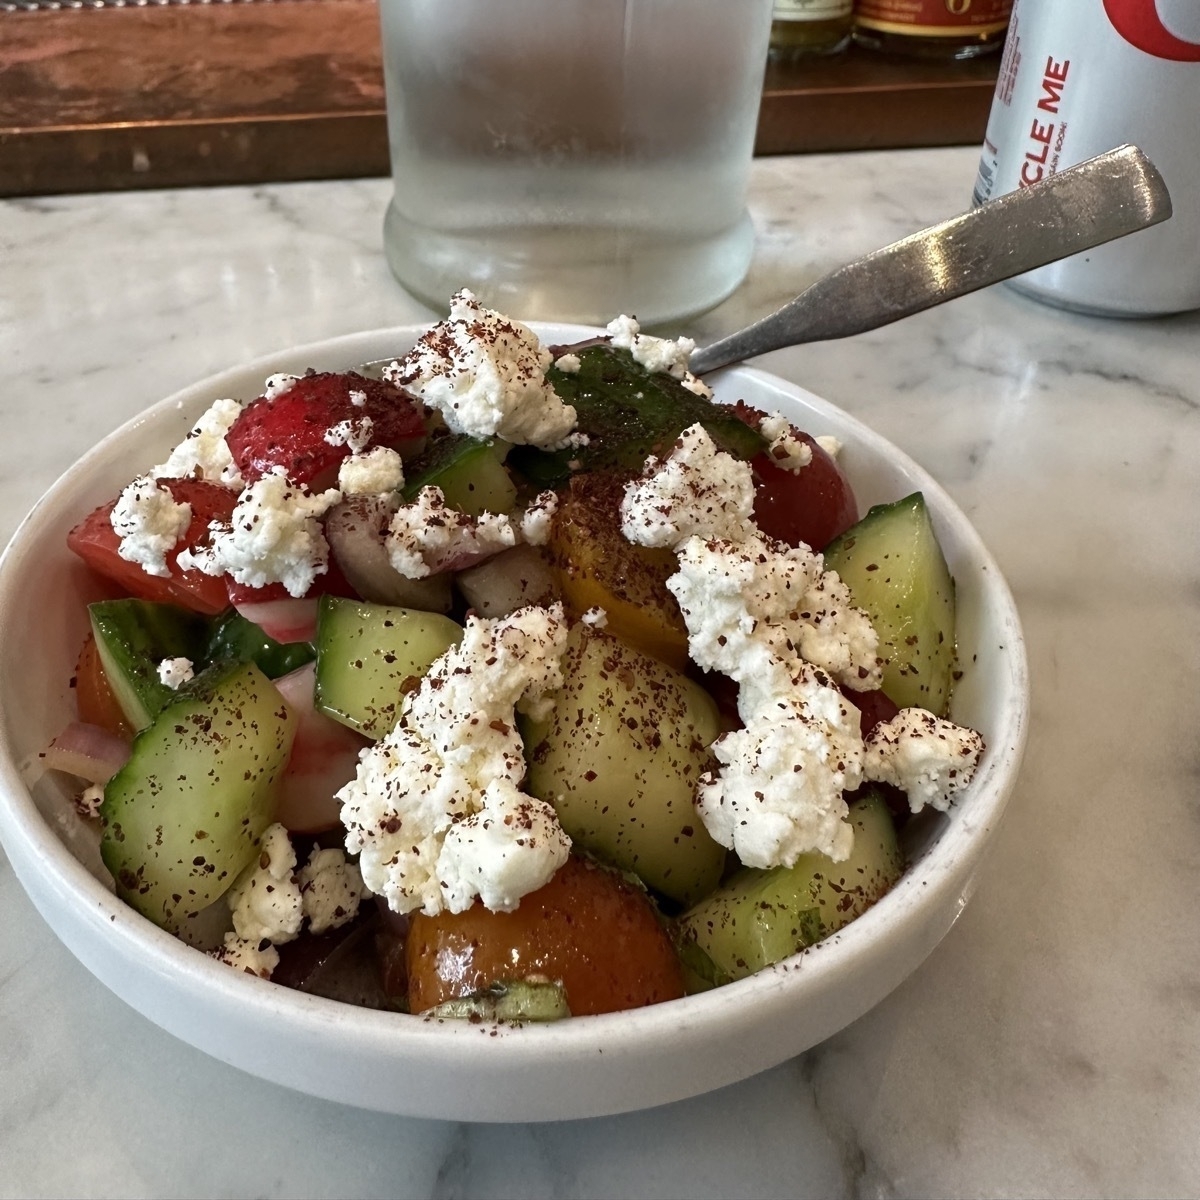 A Greek chopped salad in a small white bowel on a marble-like surface.